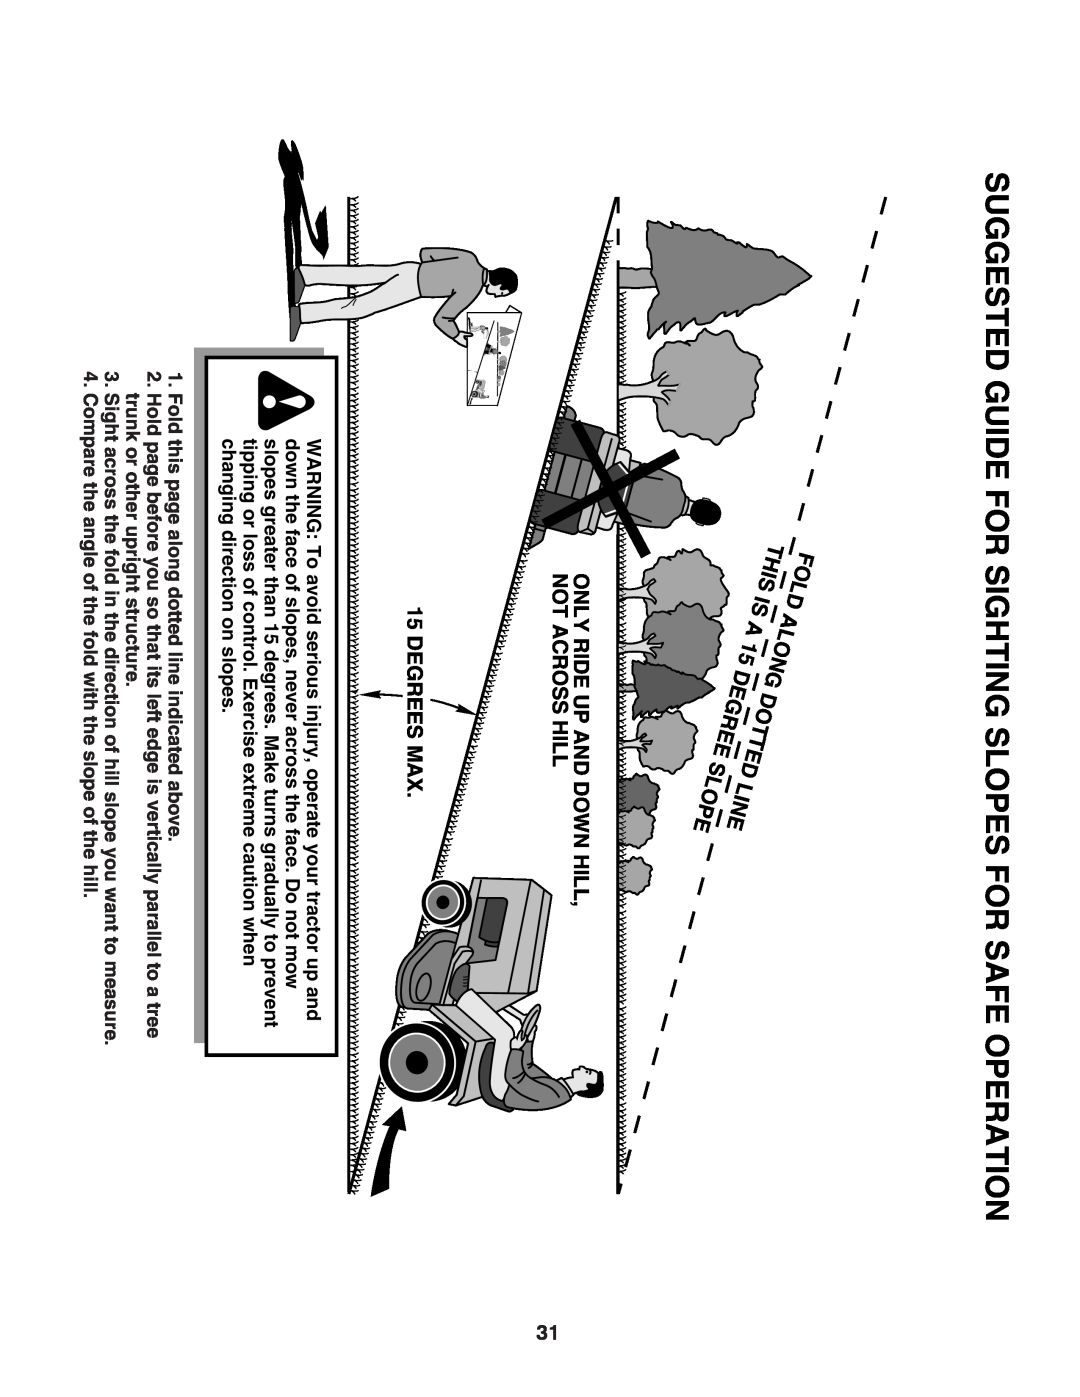 McCulloch 422800 manual Suggested Guide For Sighting Slopes For Safe Operation 